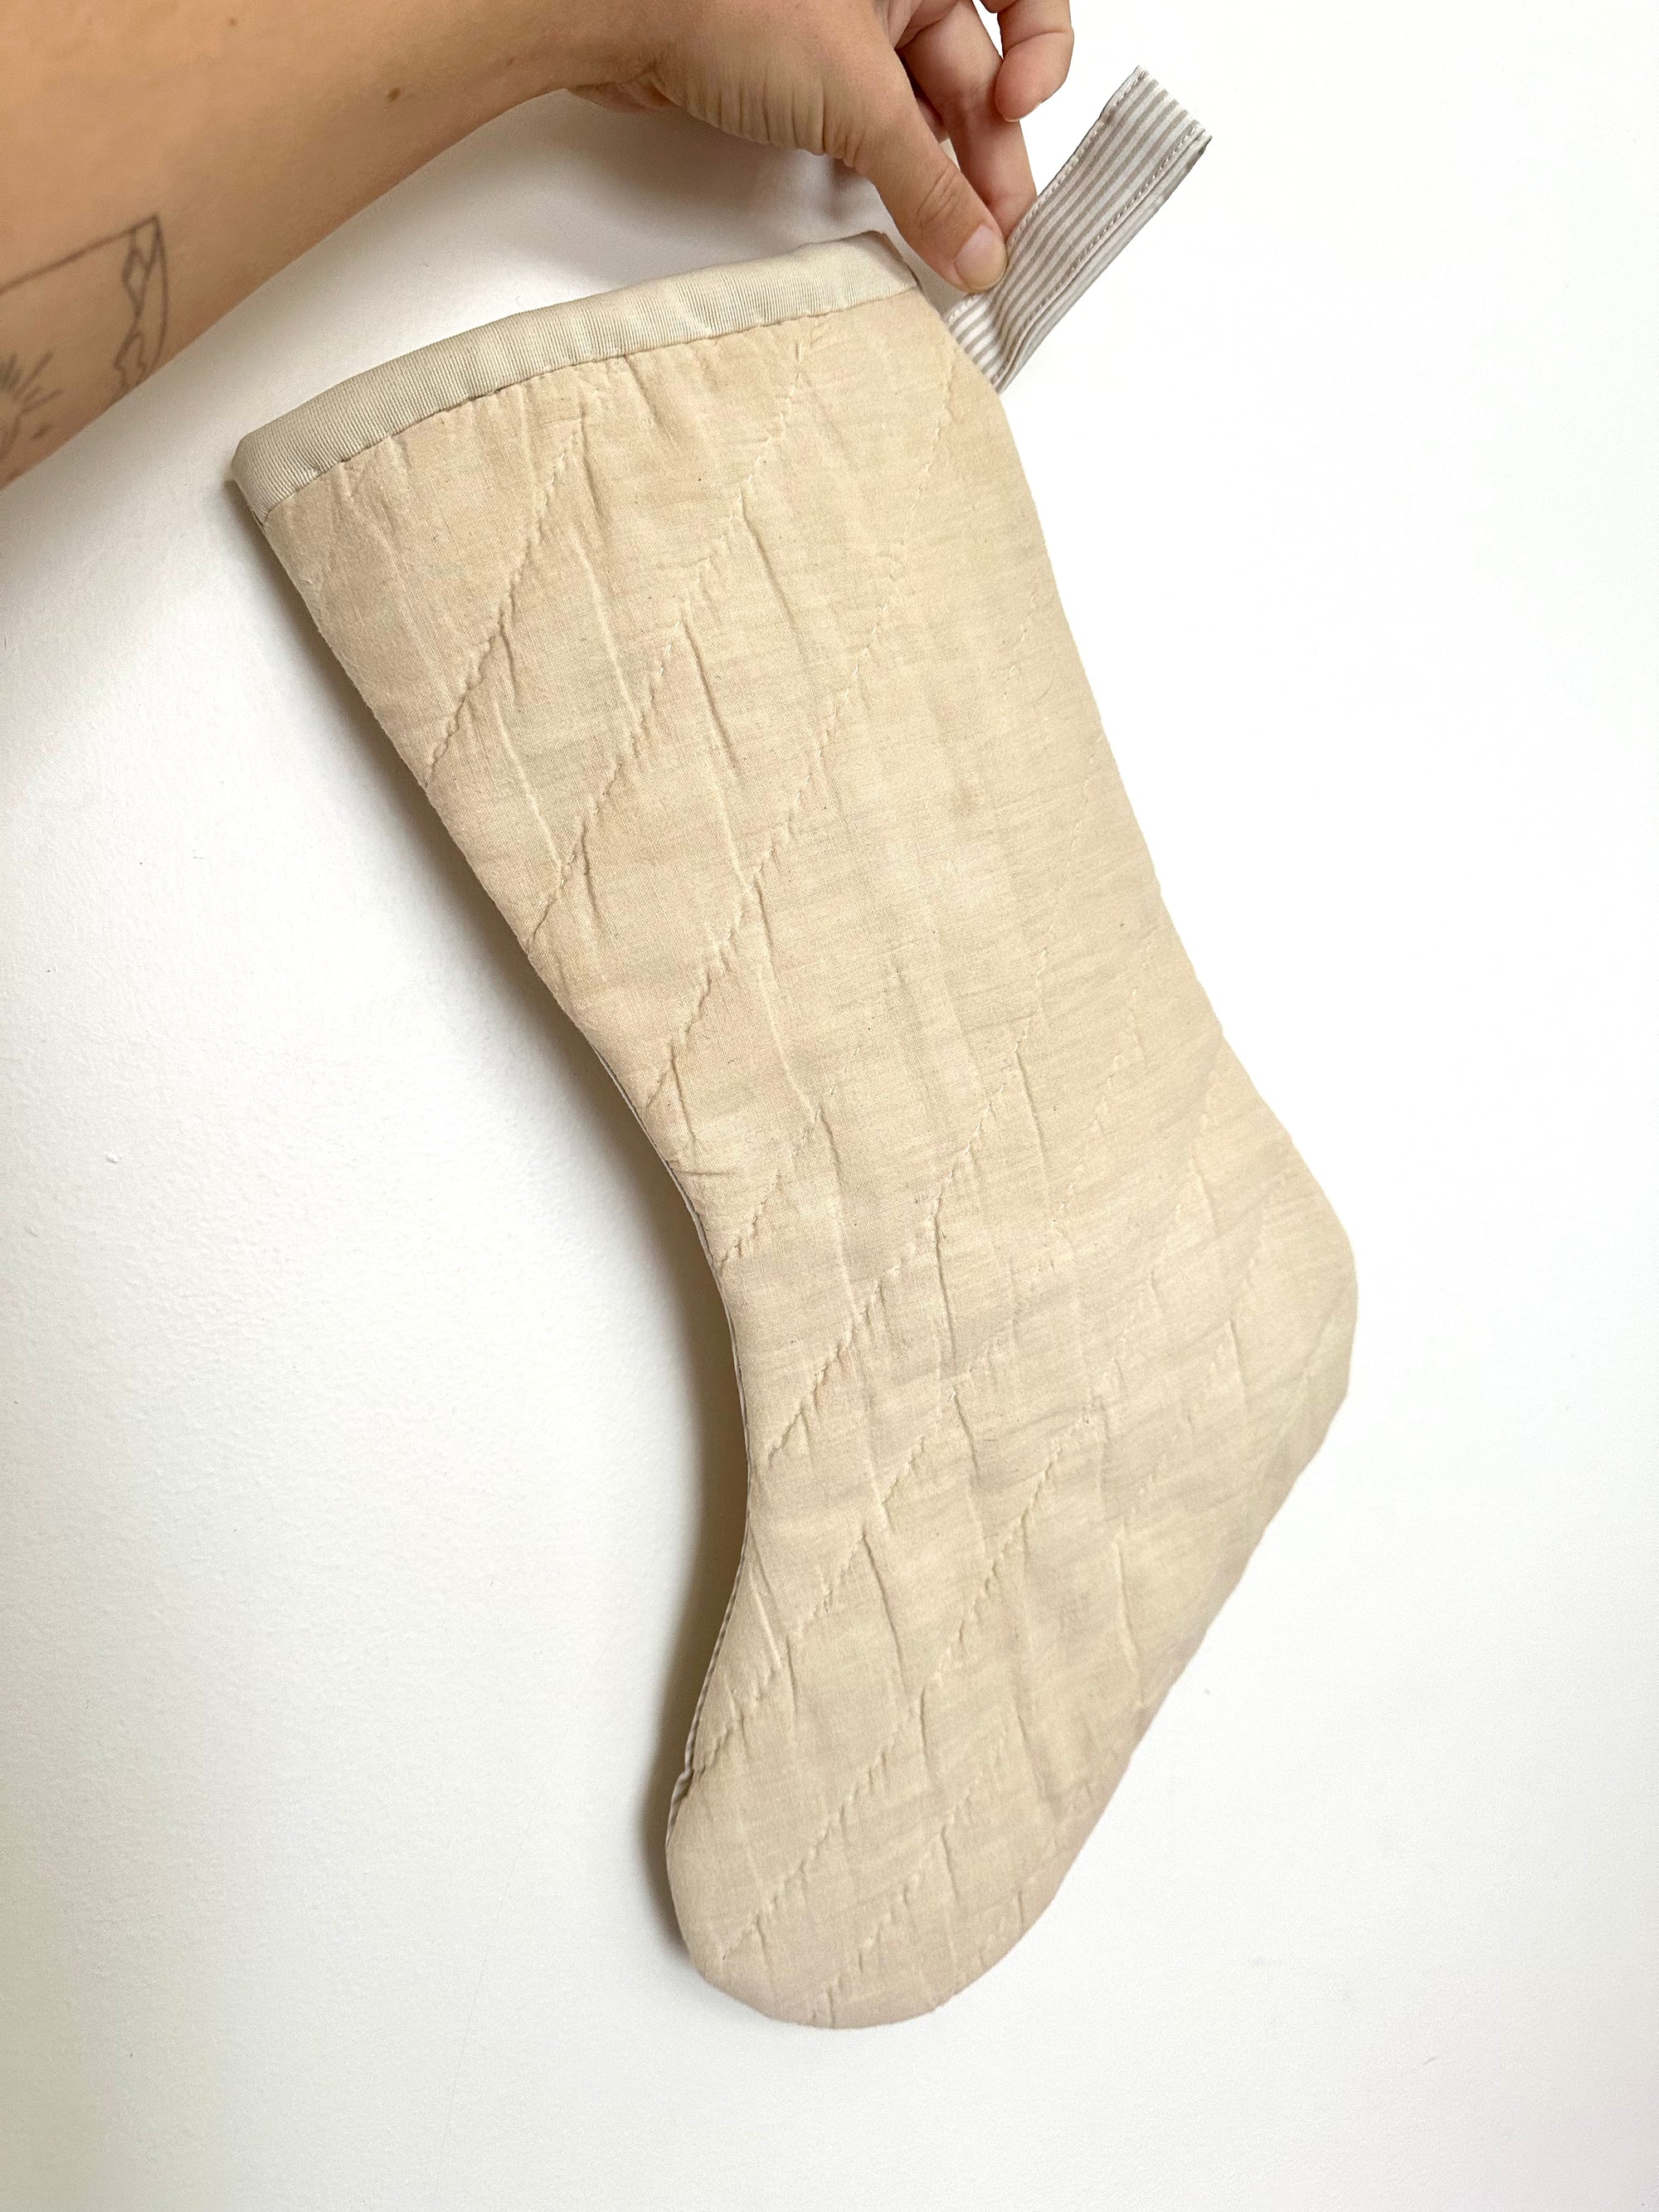 recycled quilt stockings